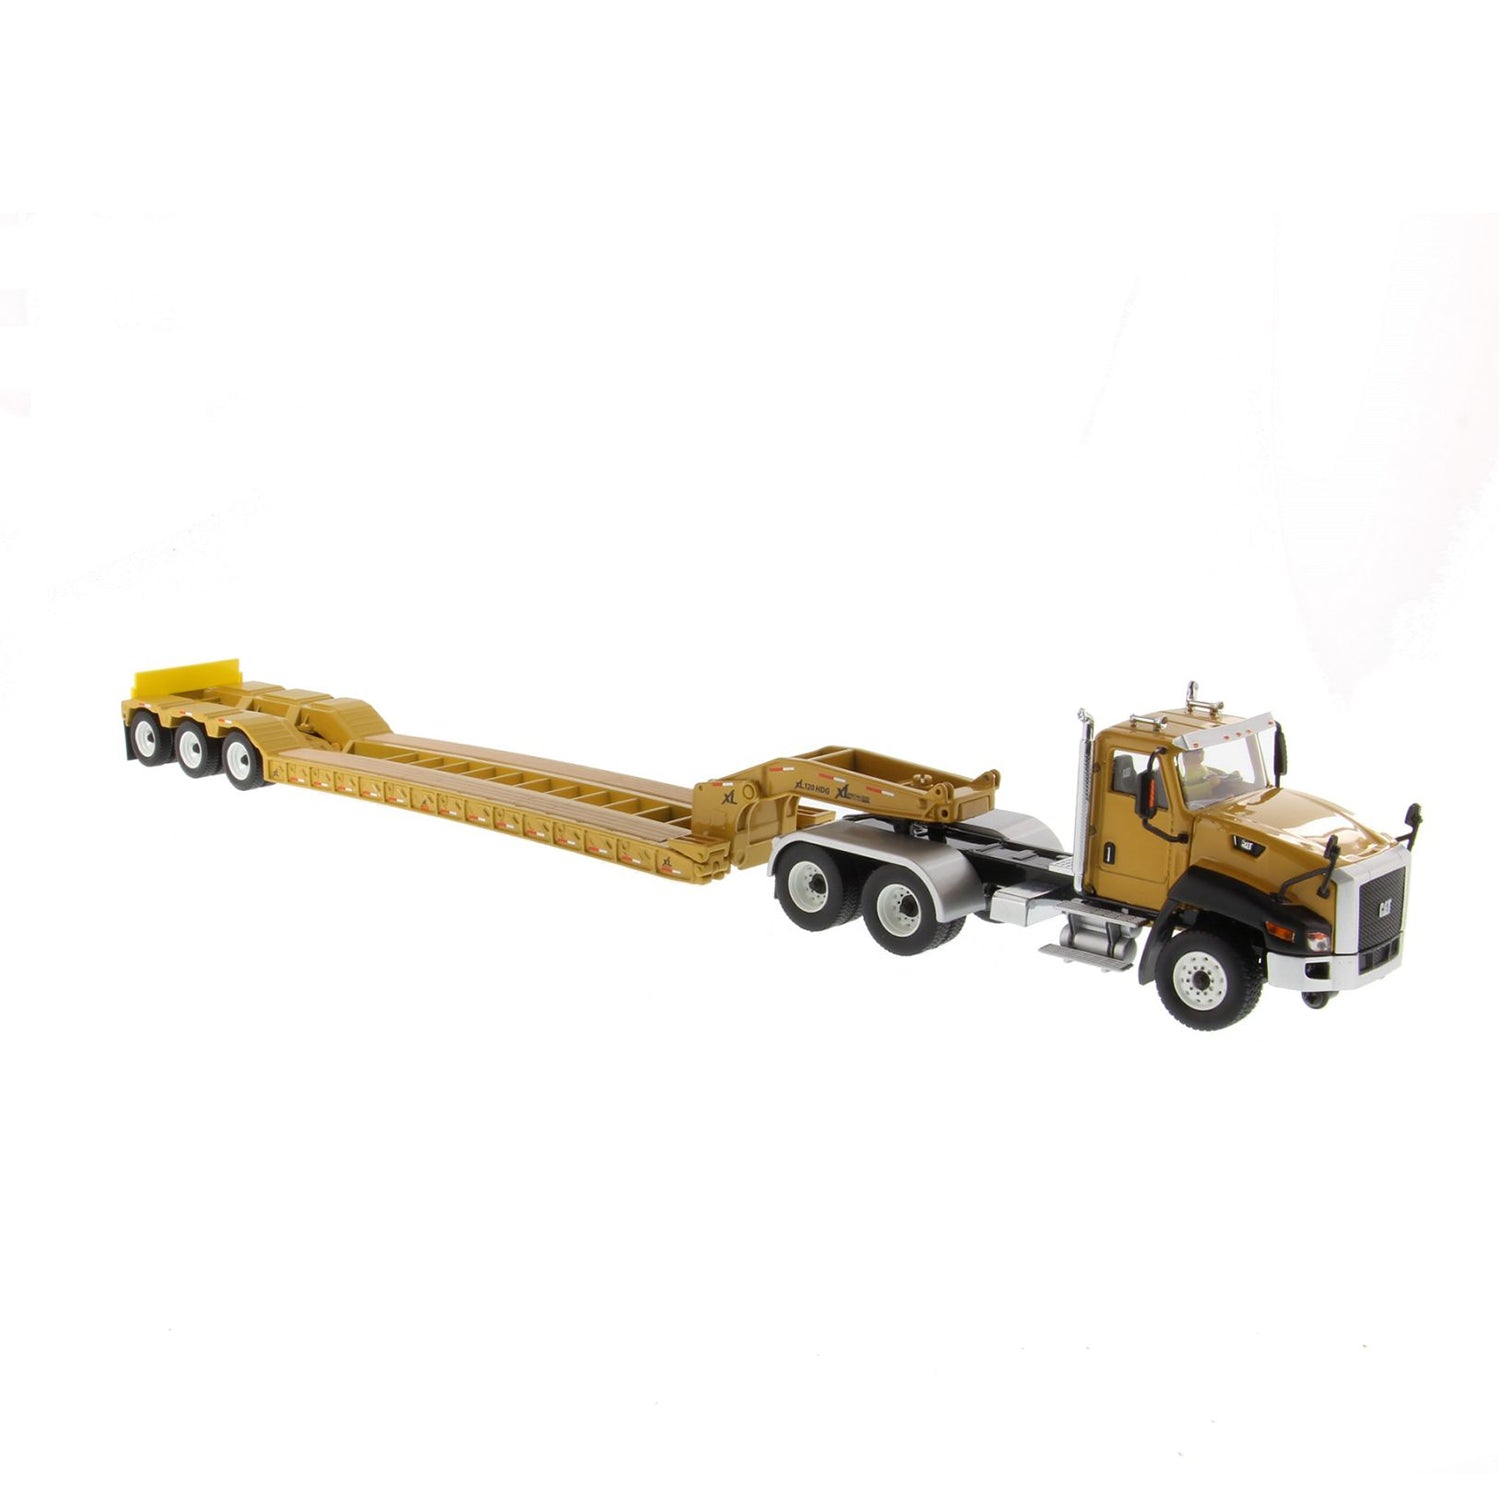 CAT CT660 Day Cab Tractor & XL 120 Low-Profile HDG Trailer 1:50